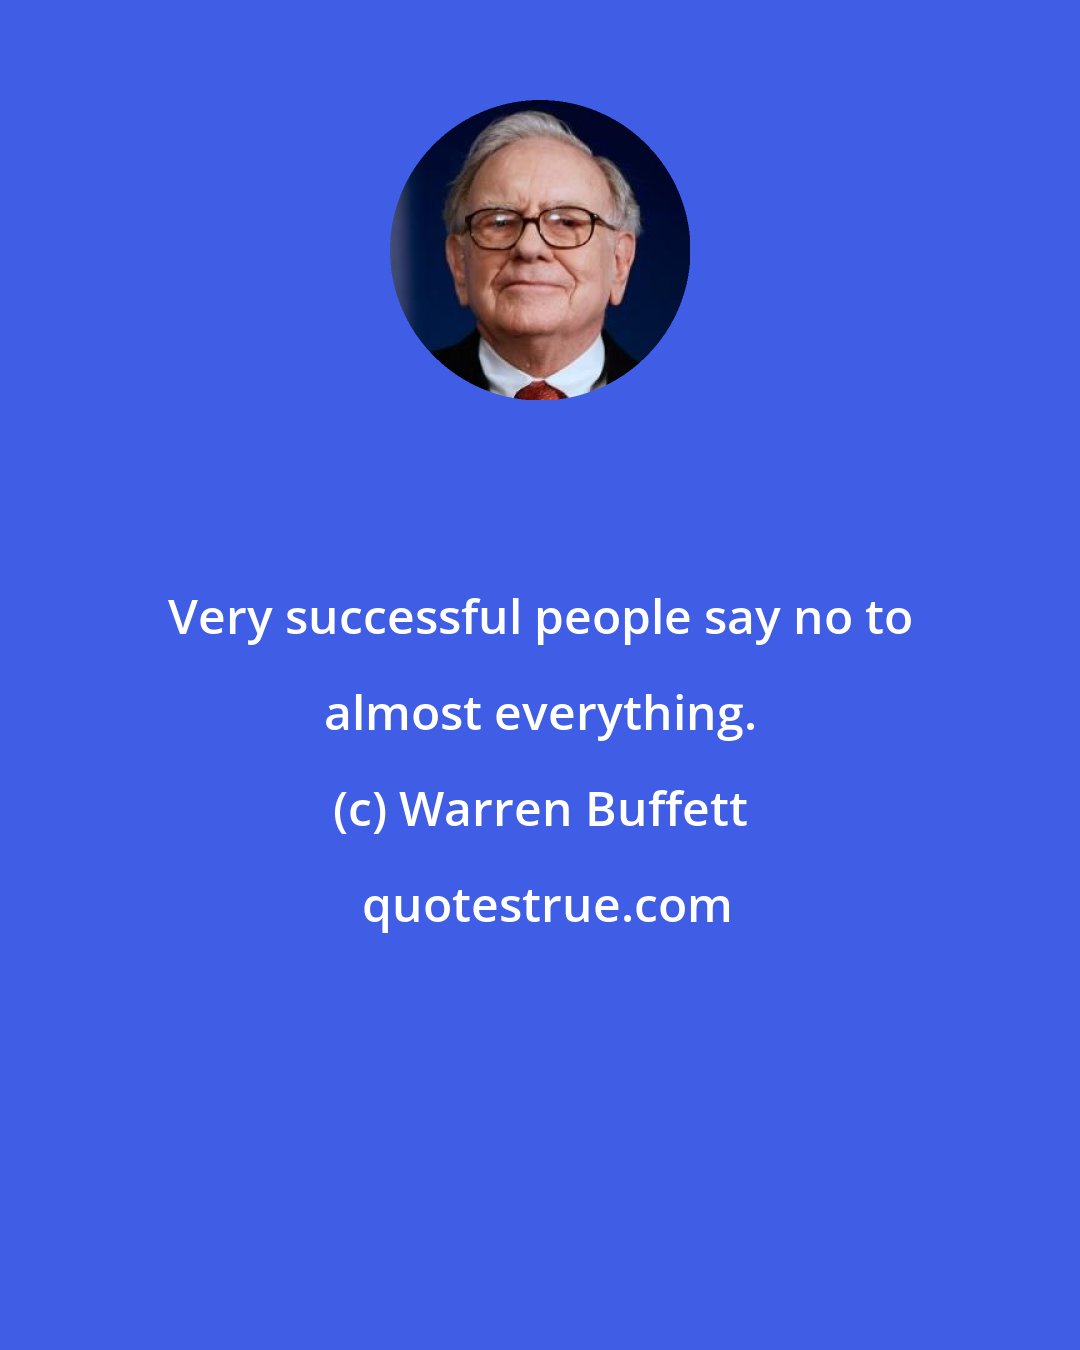 Warren Buffett: Very successful people say no to almost everything.